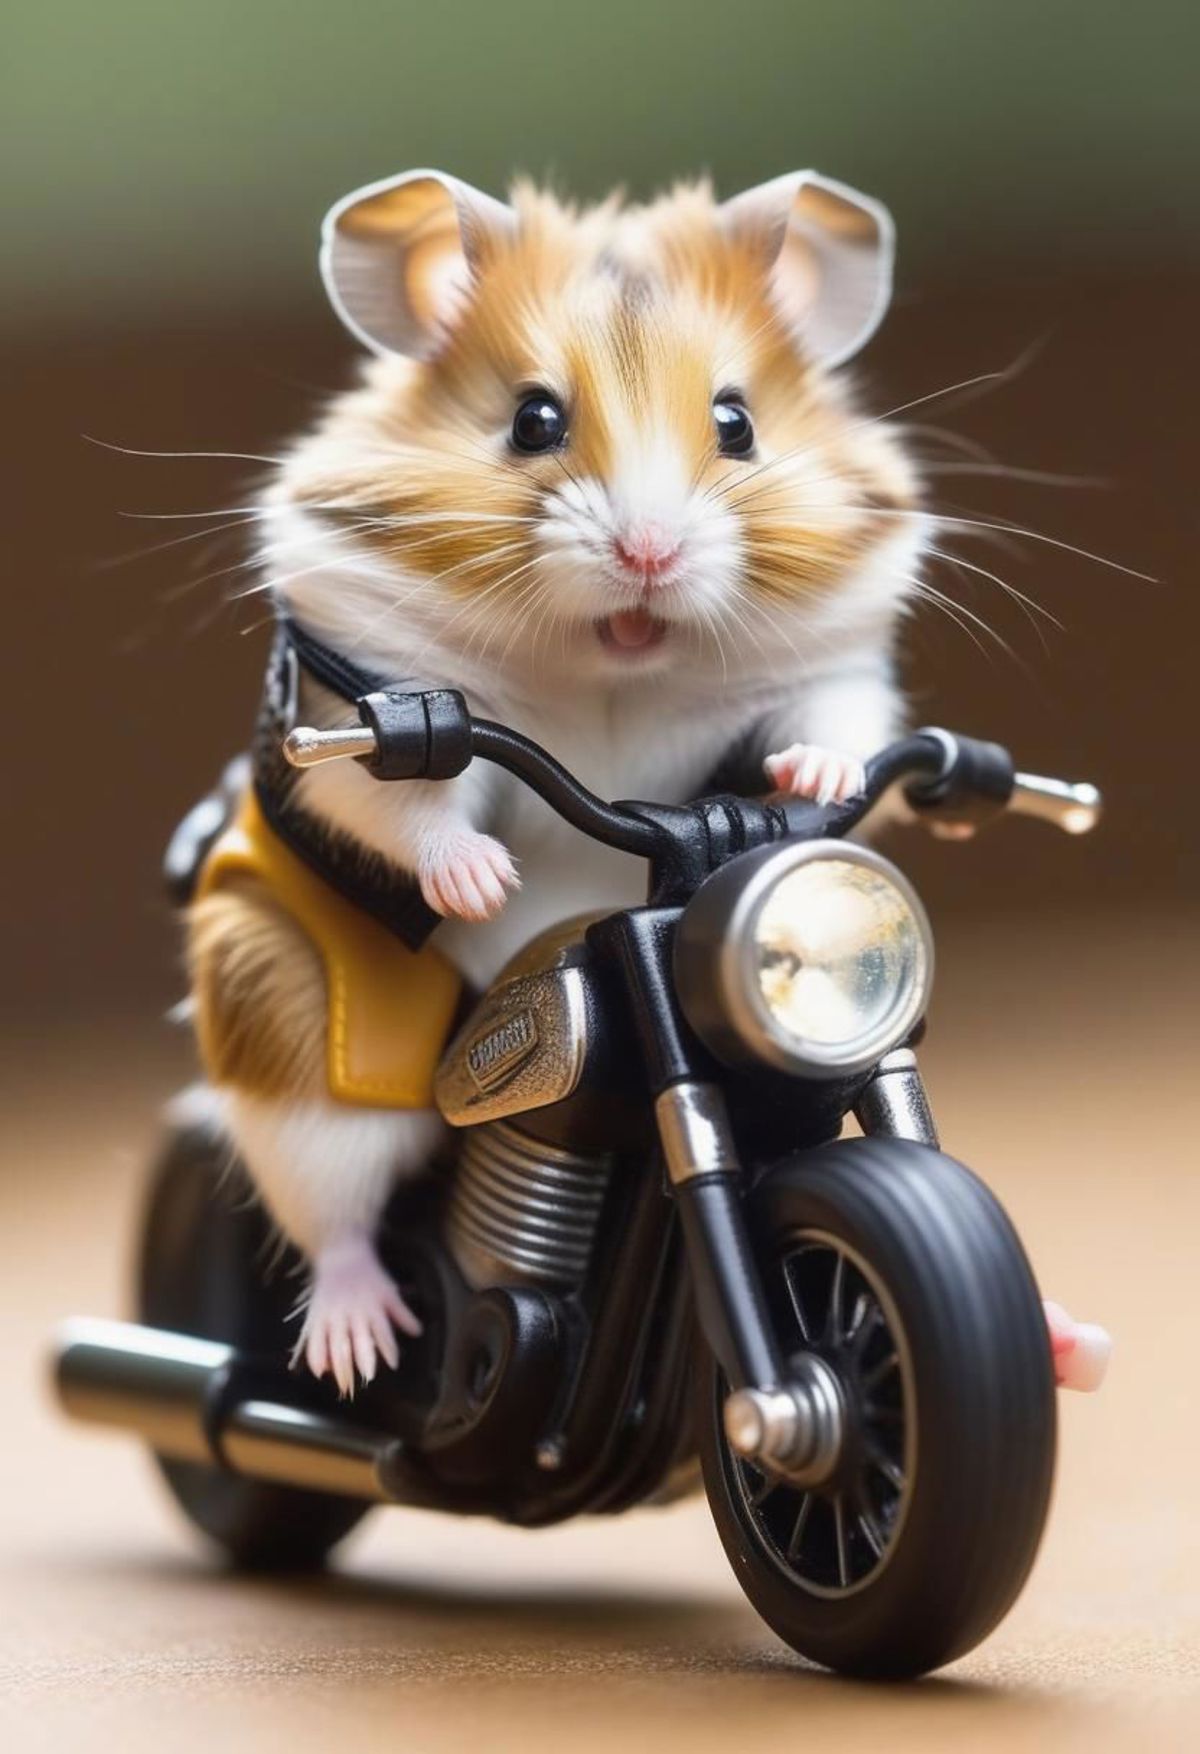 A Hamster Sitting on a Miniature Motorcycle Toy